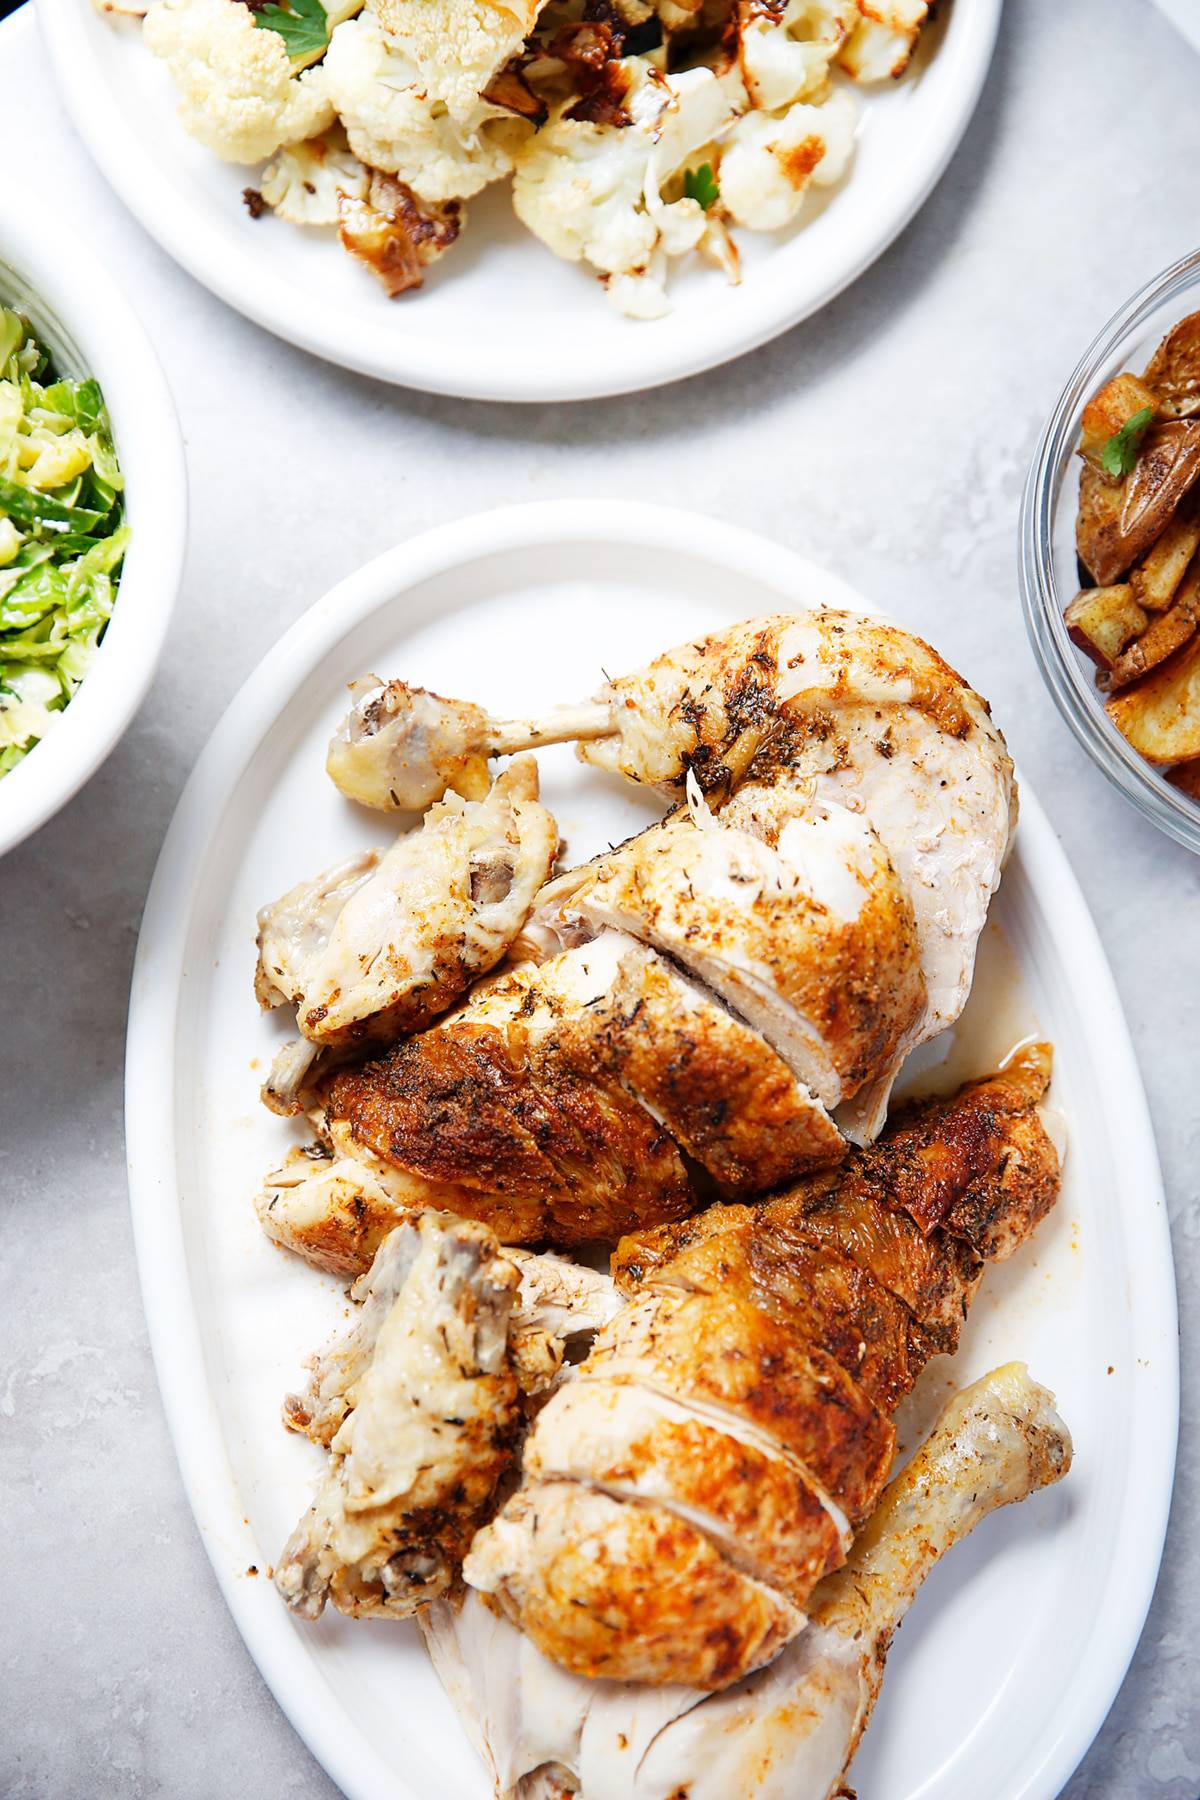 How to Roast a Chicken in the Instant Pot